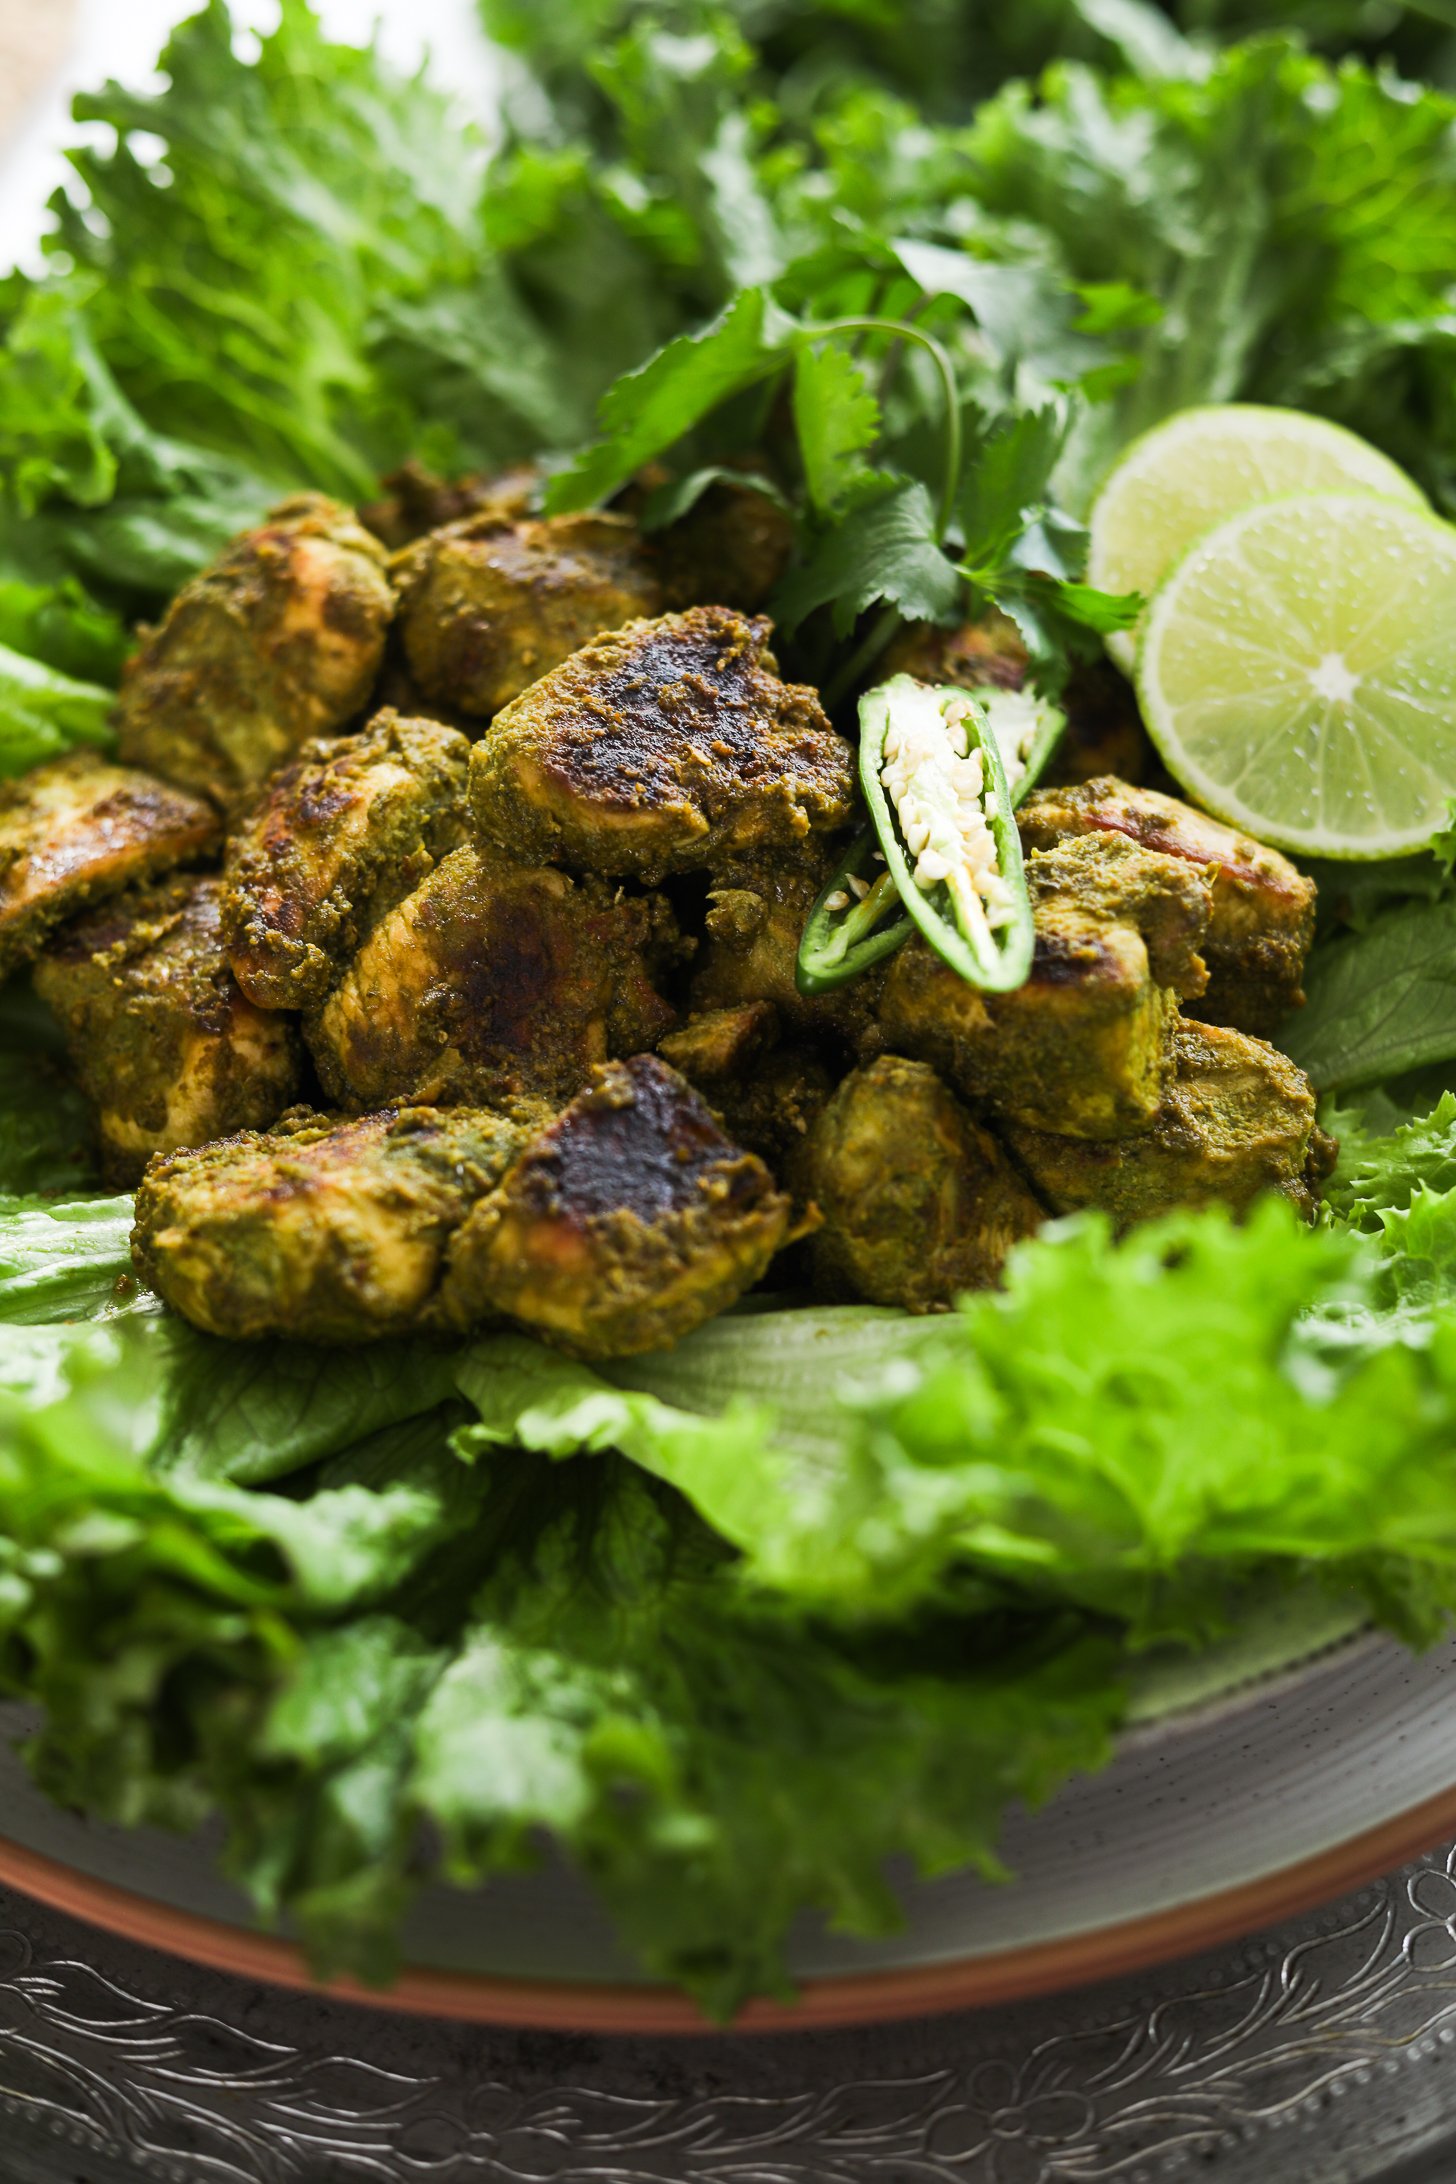 Perspective image of green chicken (Hariyali chicken) breast pieces placed on lettuce leaves garnished with chilli and lime.